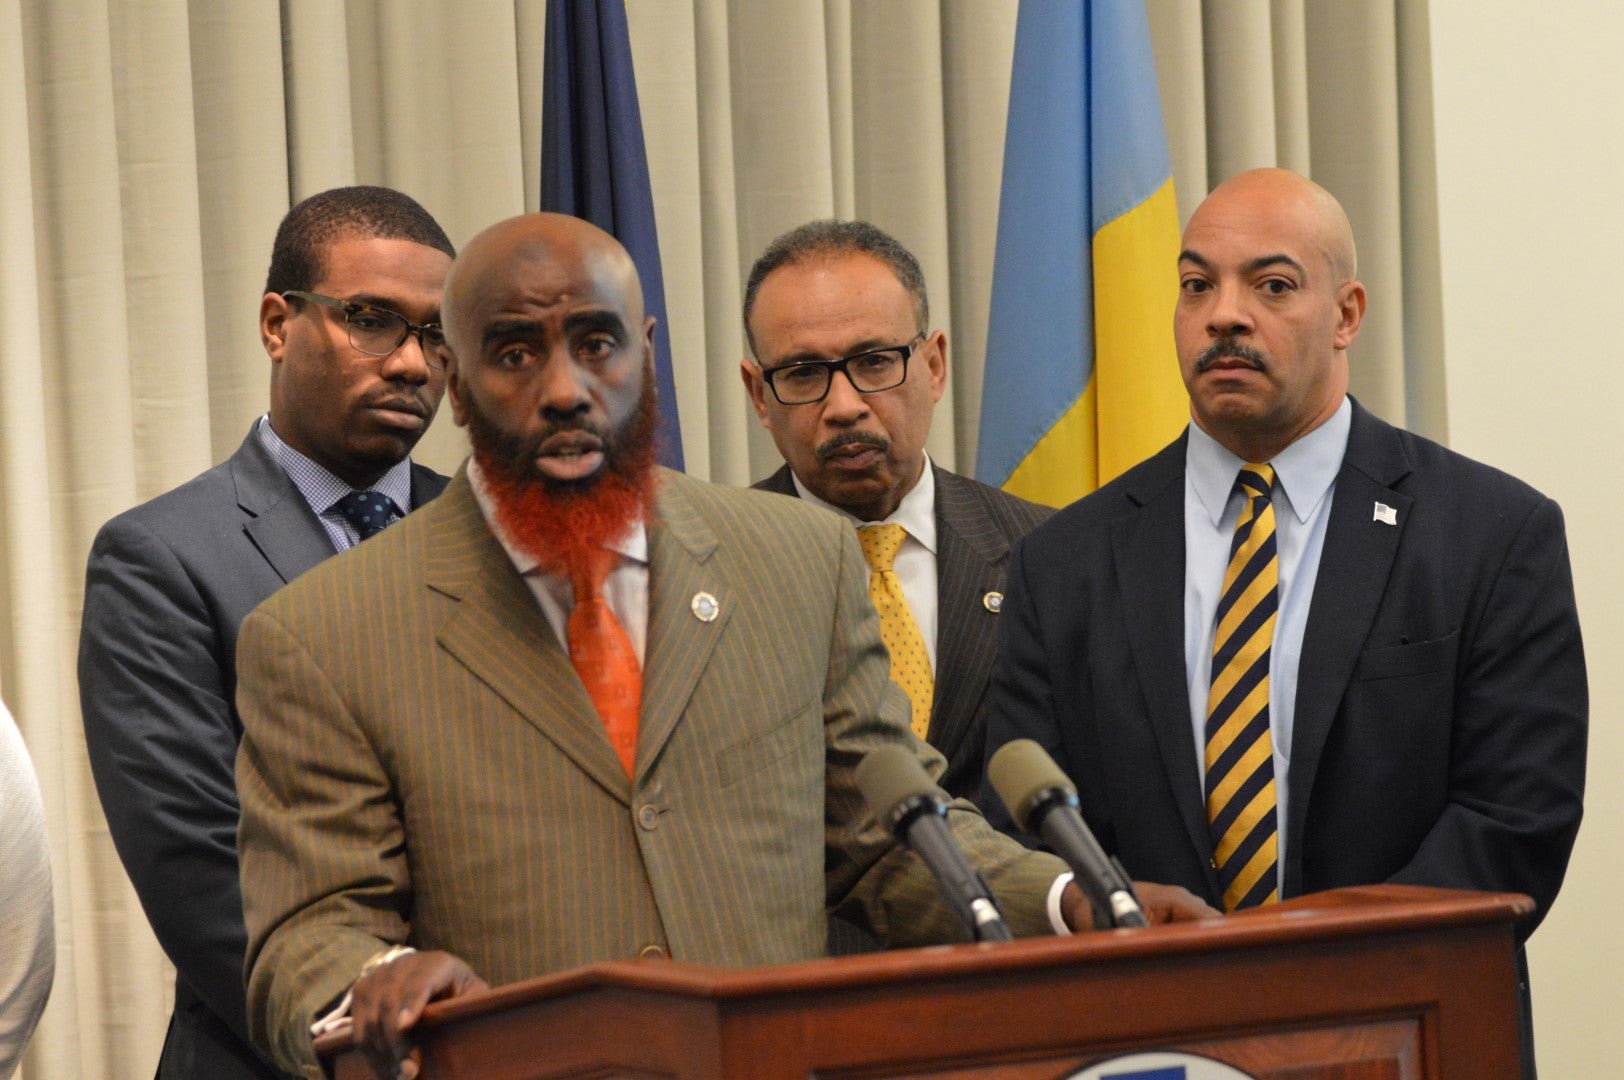 Philadelphia Assistant District Attorney Tariq El Shabazz says district attorneys will come to shooting sites in some cases before the crime-scene technicians for a parallel investigation. (Tom MacDonald/WHYY)